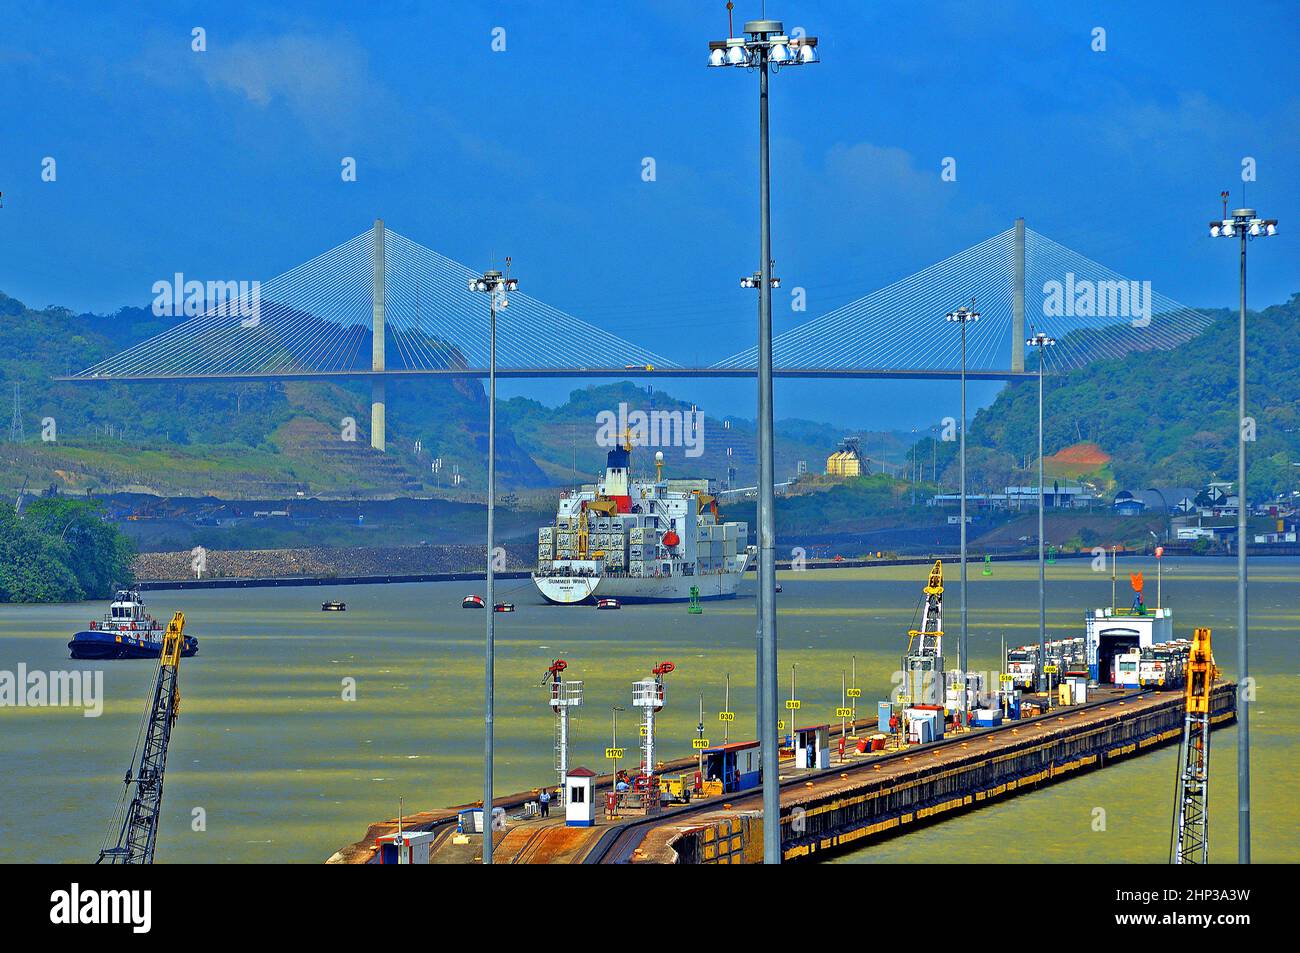 Summer Wind container ship leaving the Miraflores locks in Panama canal Stock Photo